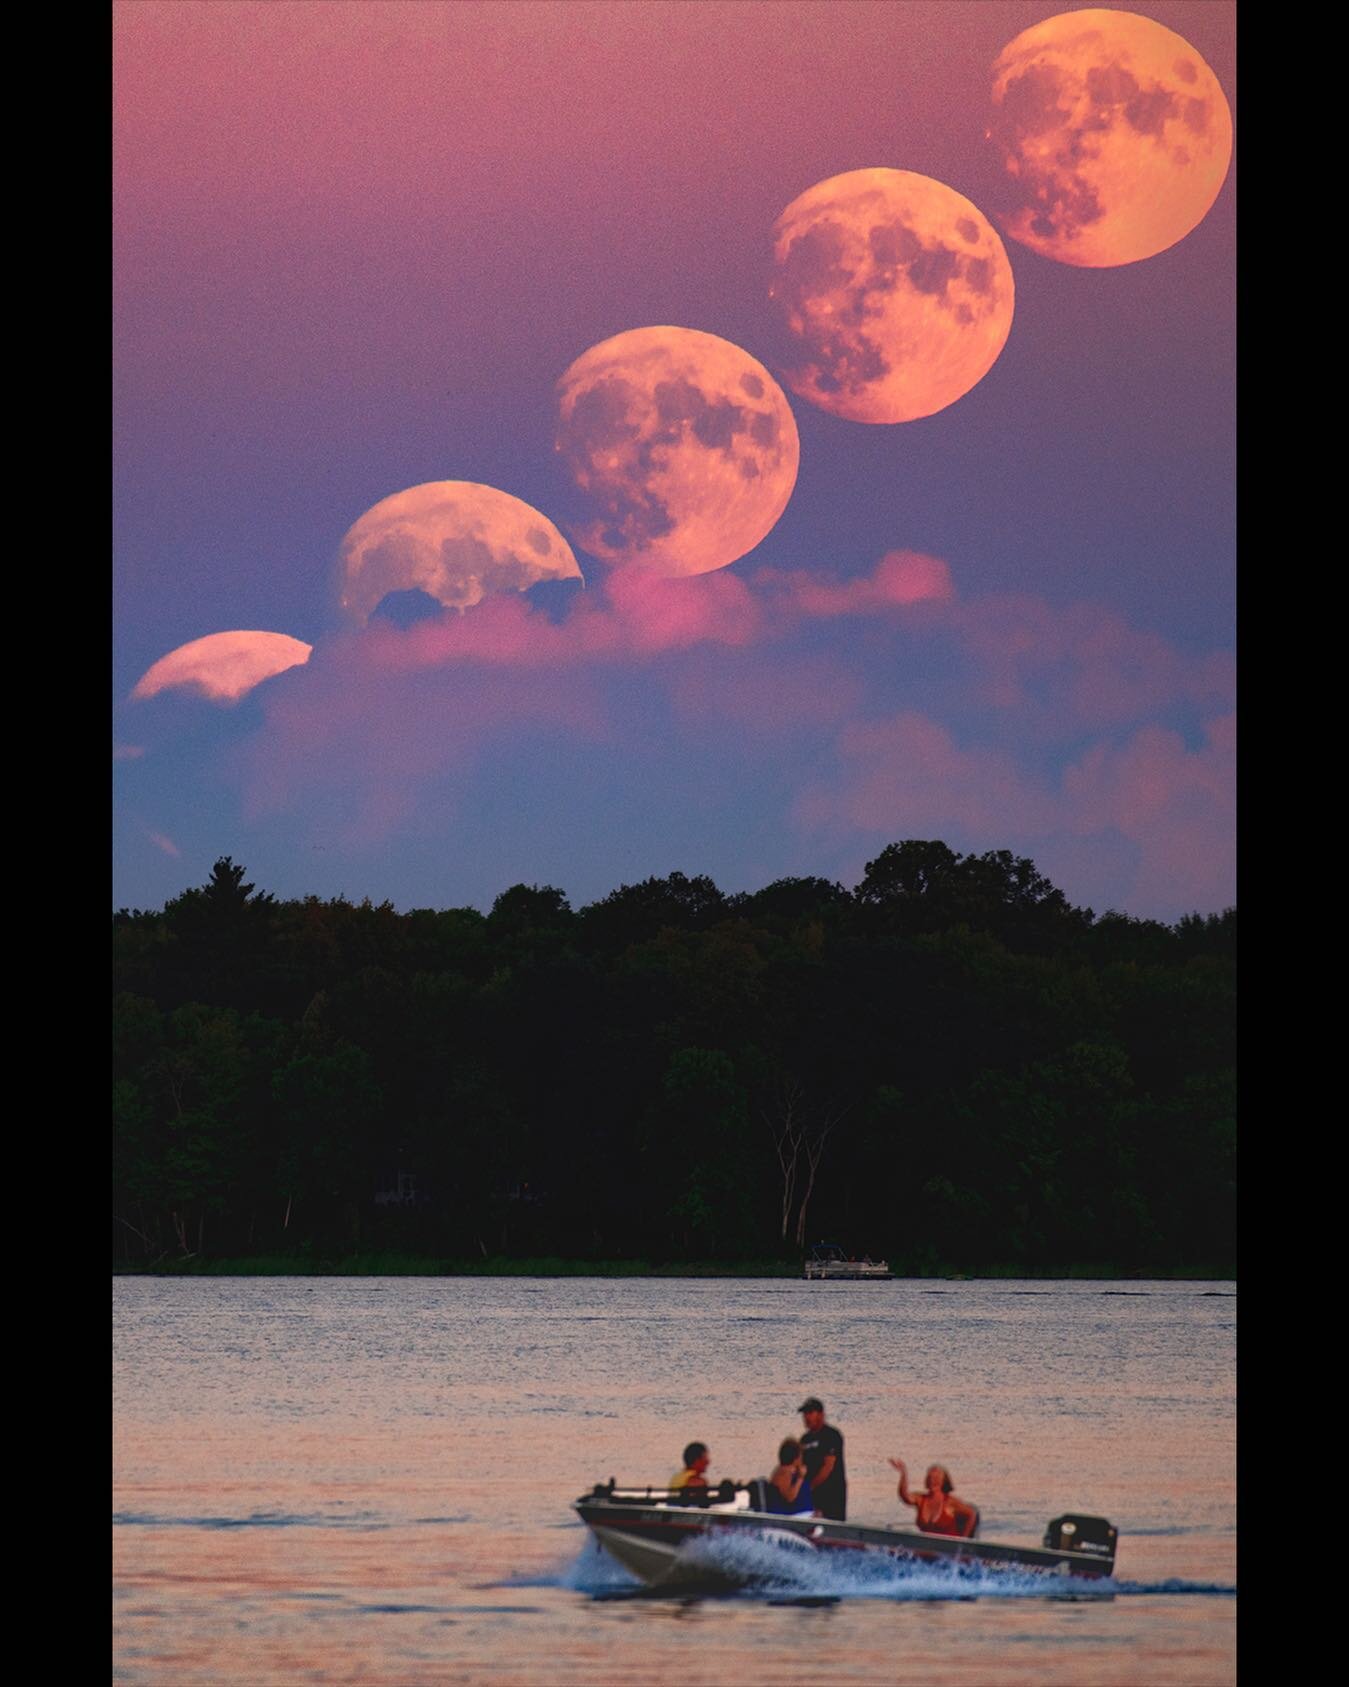 This moonrise was very special for me. It was the first time my two kids were able to join me for a moonrise photo session. The weather was perfect, the timing was right, and they were finally old enough not to get into too much trouble during the ev